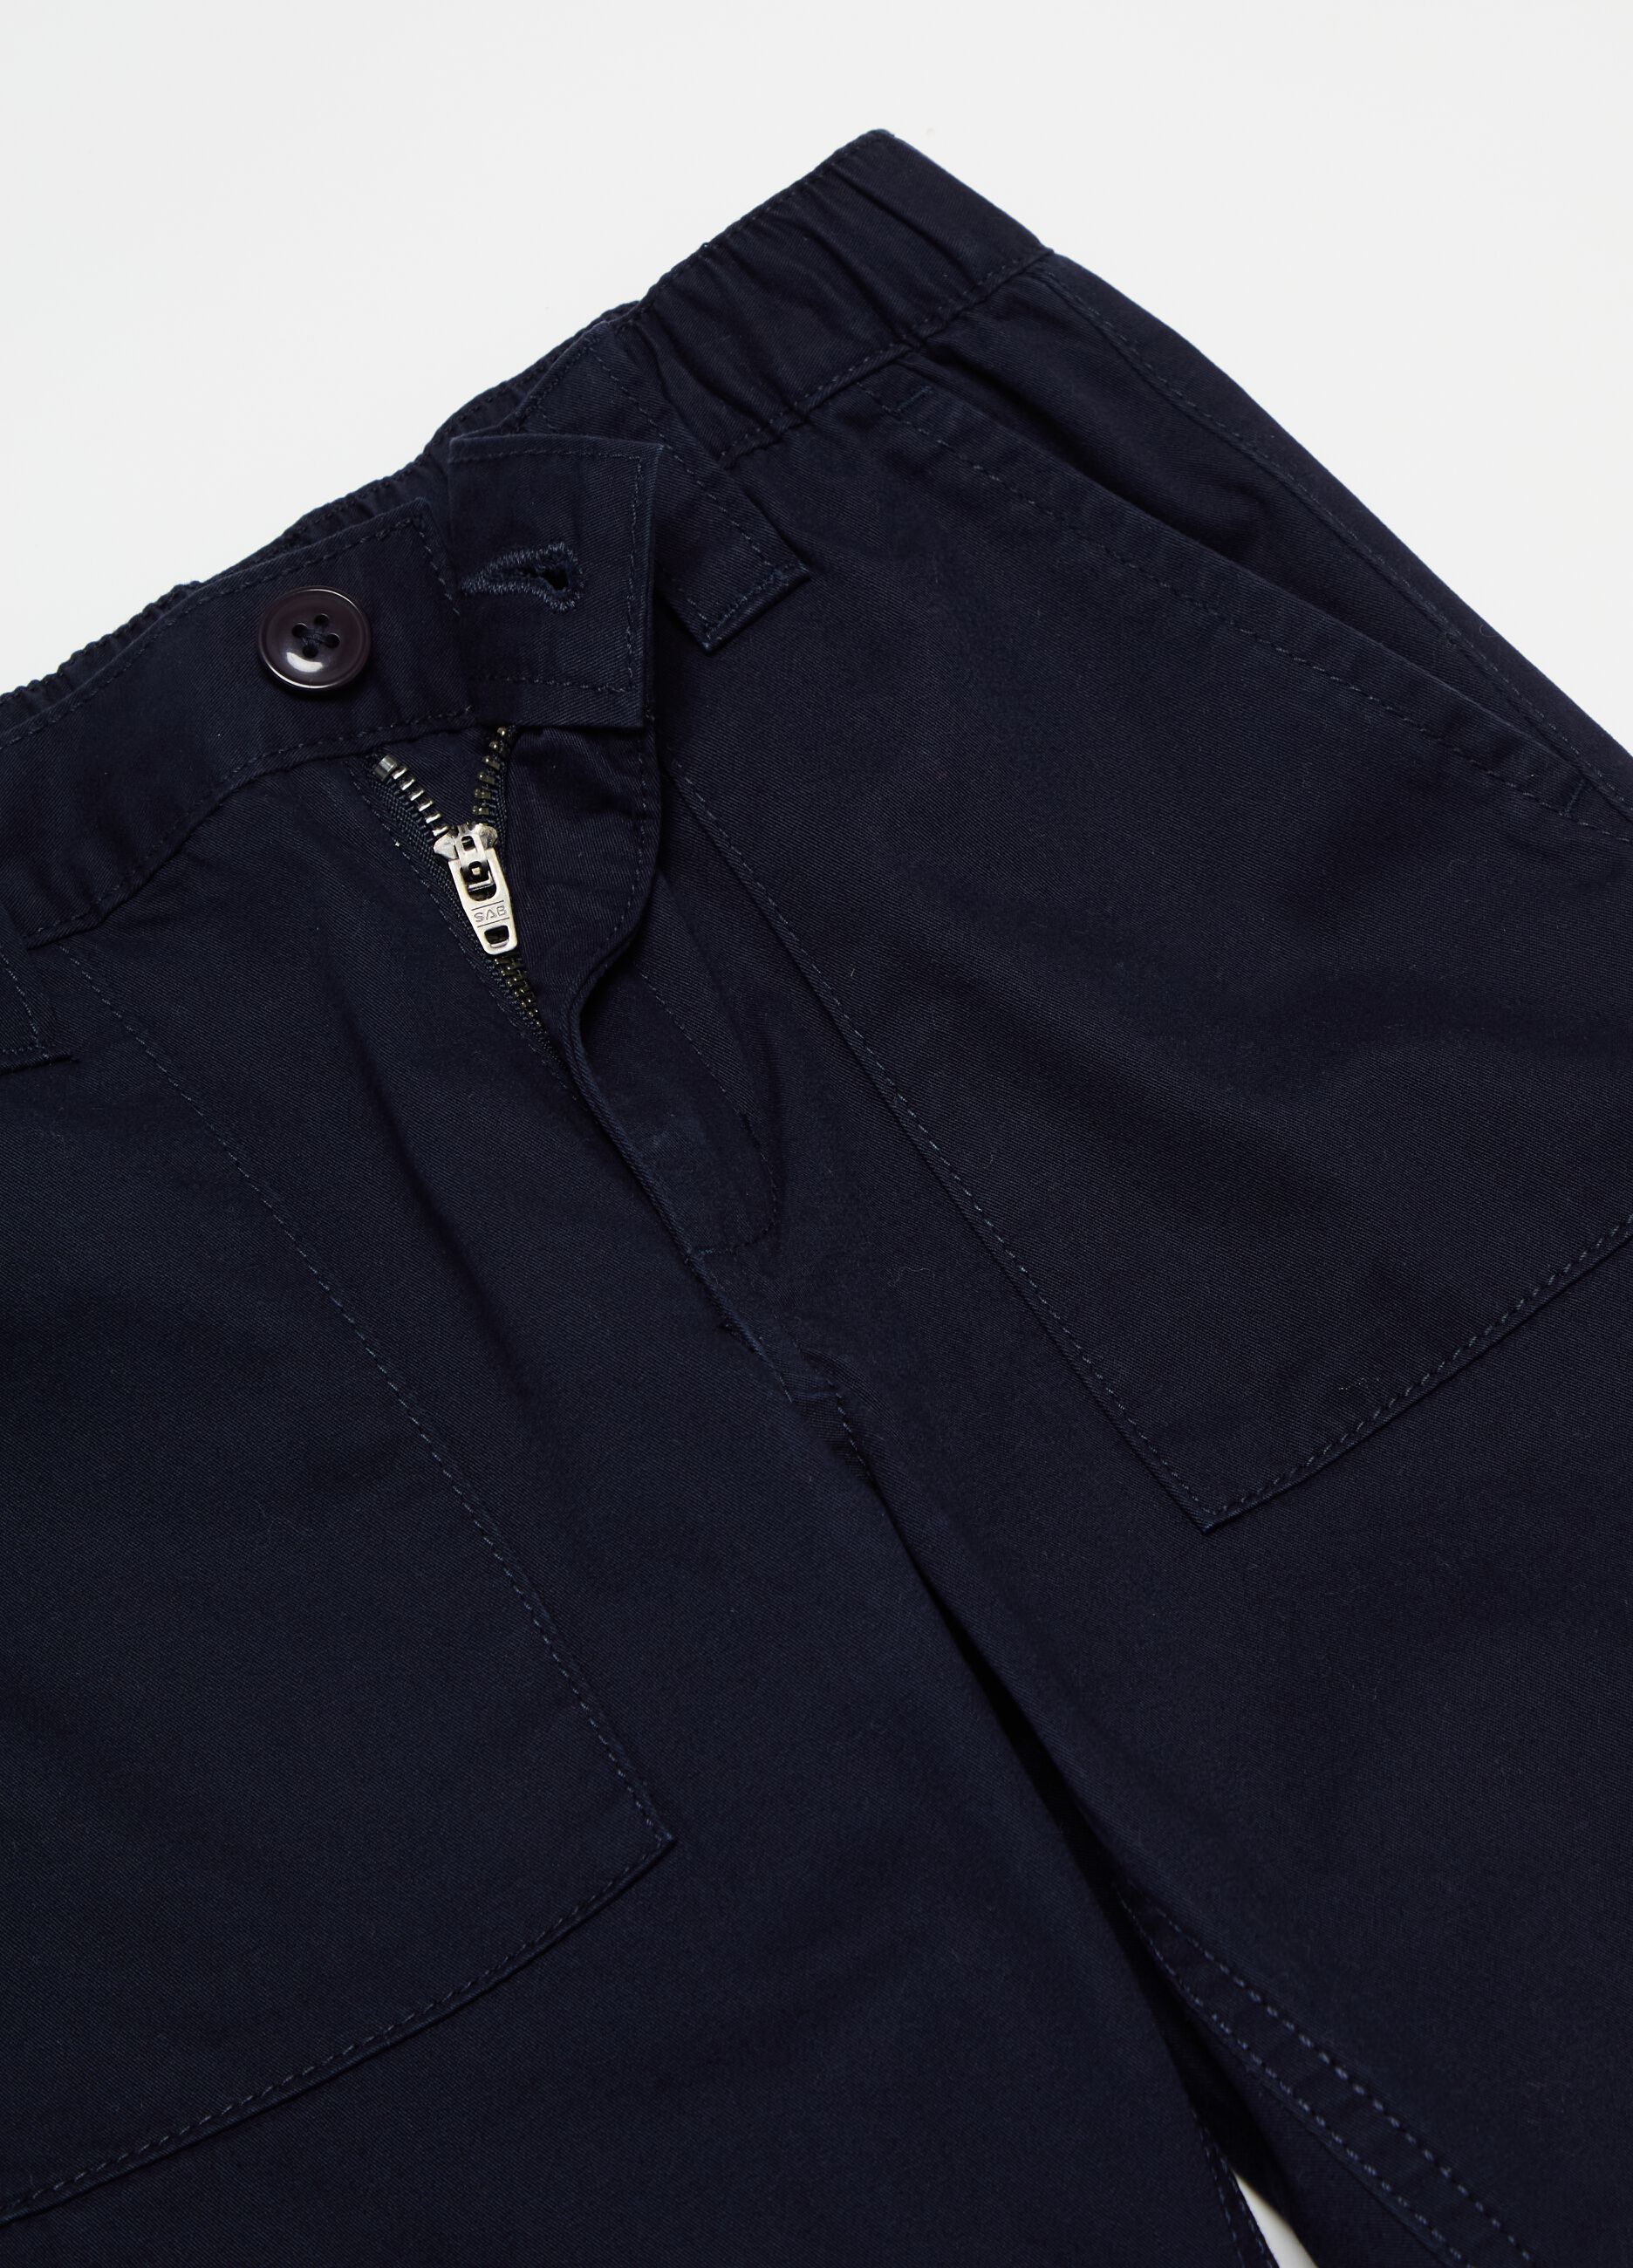 Cotton trousers with pockets